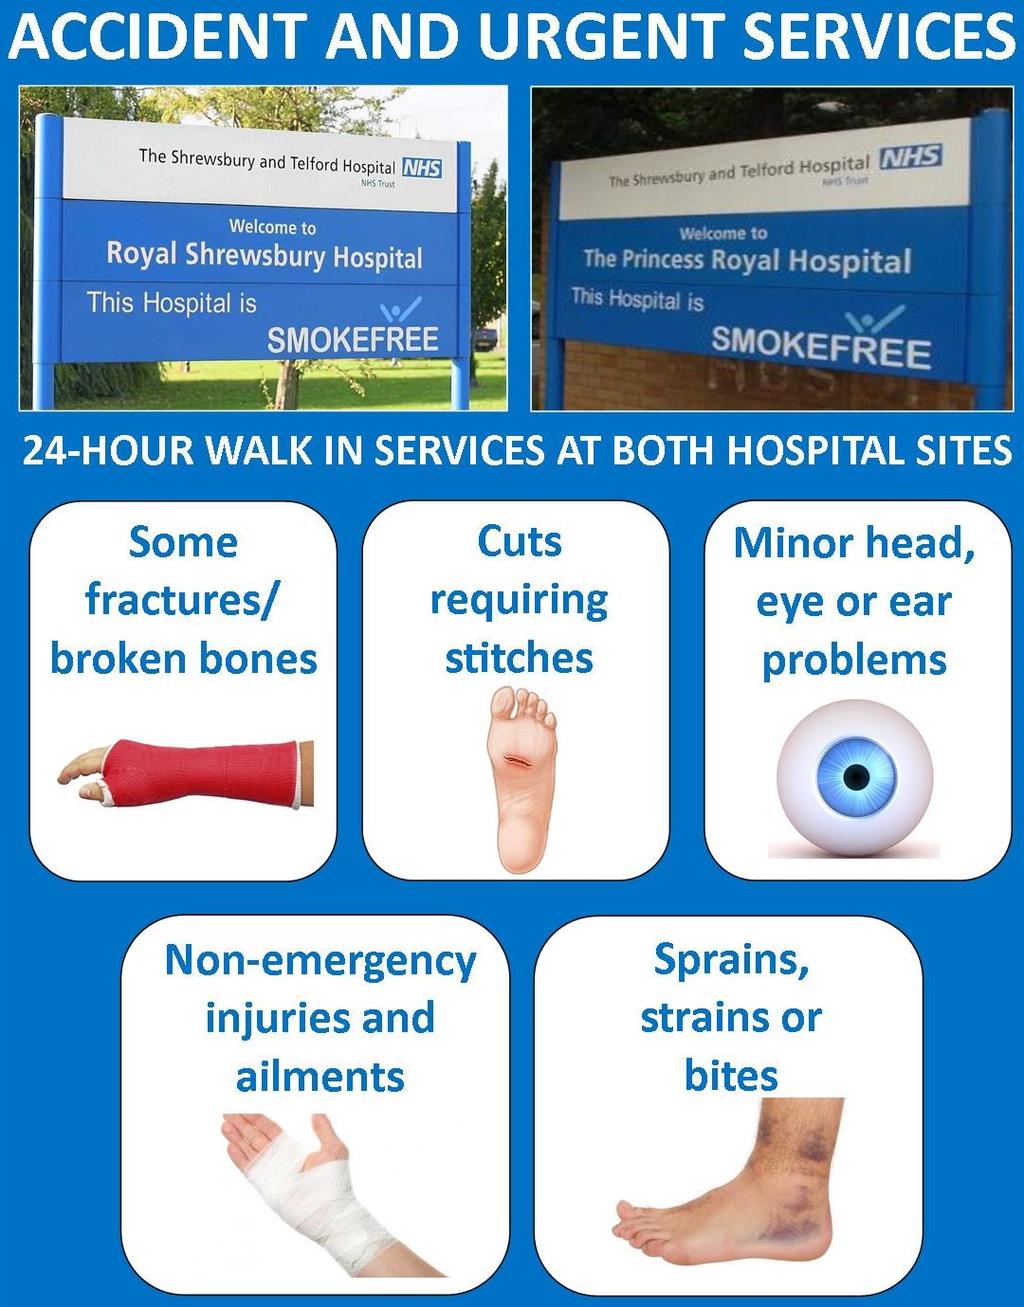 Care at your local hospital: Accident and Urgent Care Services New Accident and Urgent (A&U) Care Centres in Shropshire would be open 24-hours-a-day, sevendays-a-week and be available to treat the